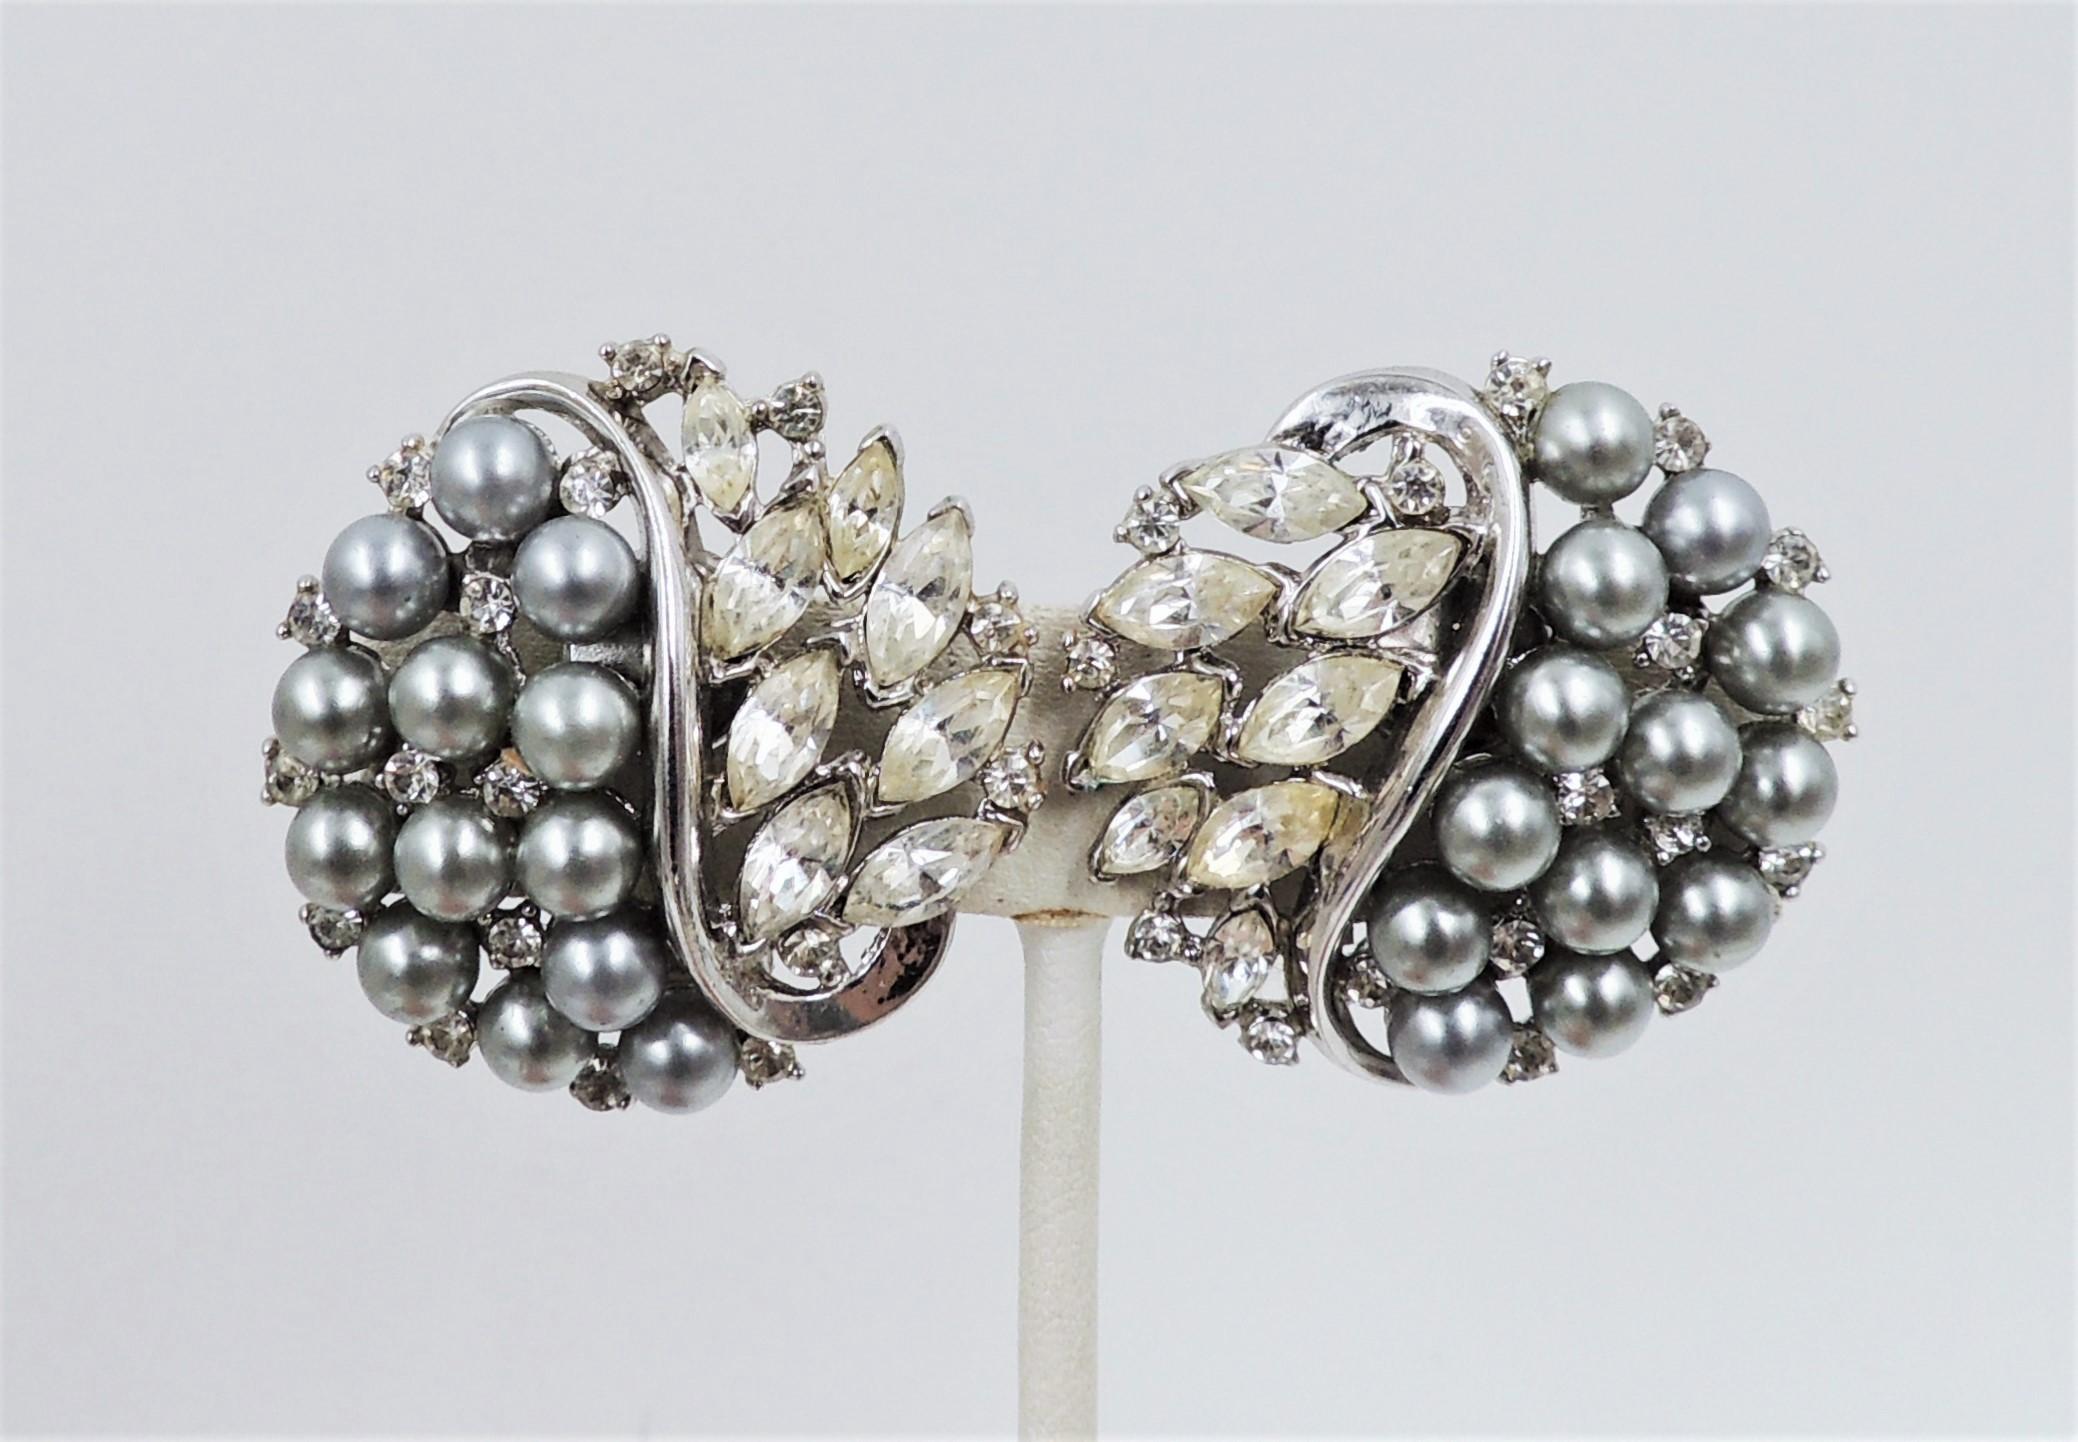 Vintage 1950s Signed Crown Trifari Faux-Black Pearl & Rhinestone Clip Earrings In Excellent Condition For Sale In Easton, PA